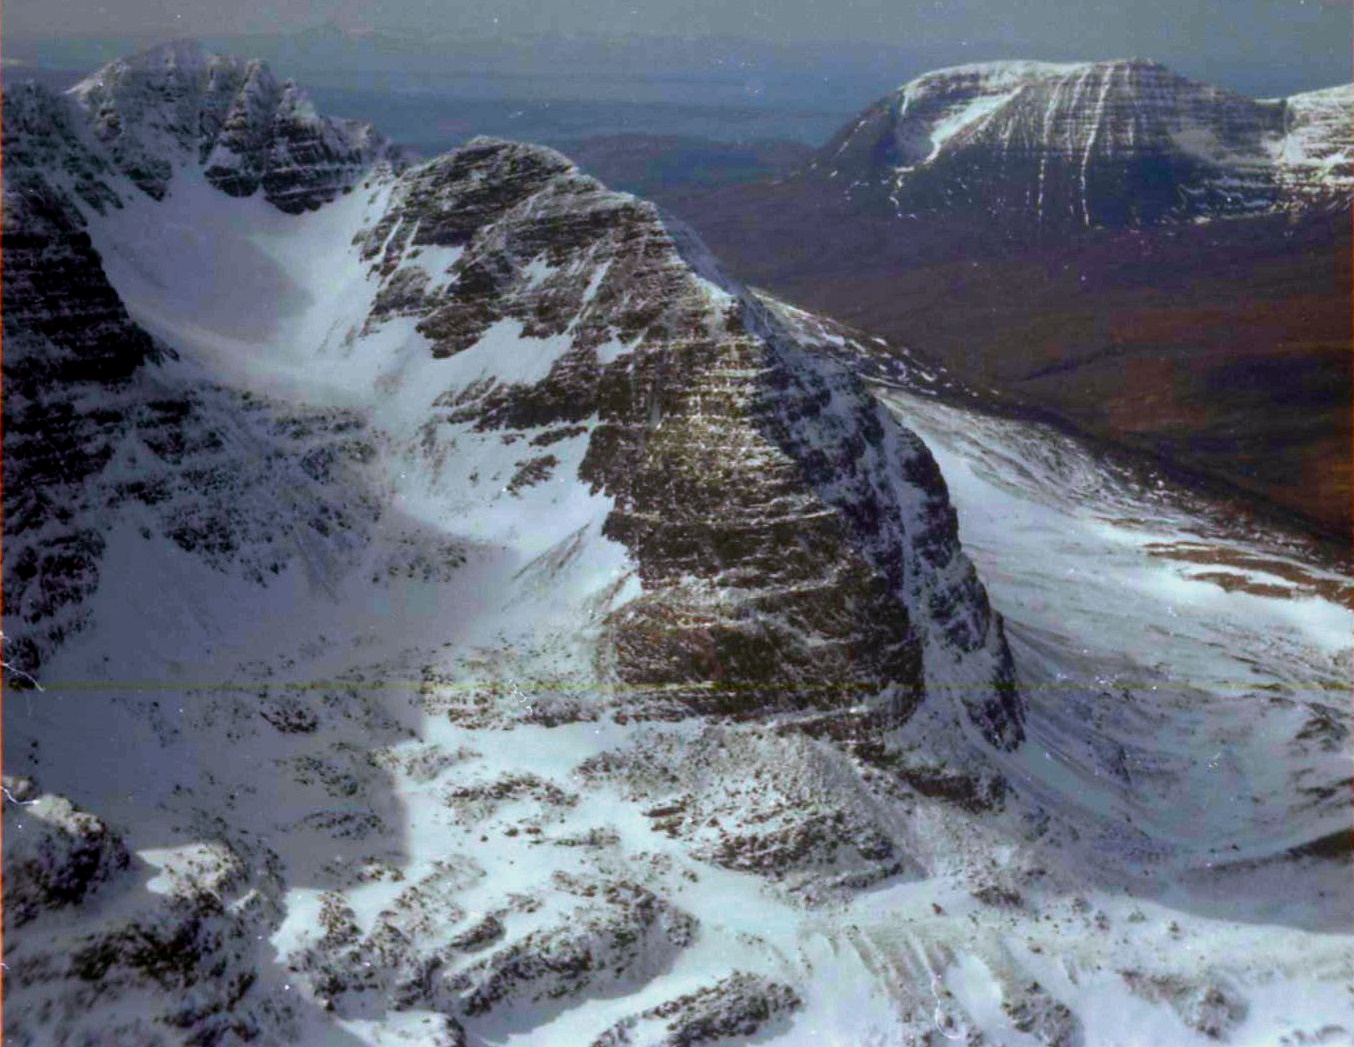 Liathach and Beinn Alligin in the Torridon region of the NW Highlands of Scotland